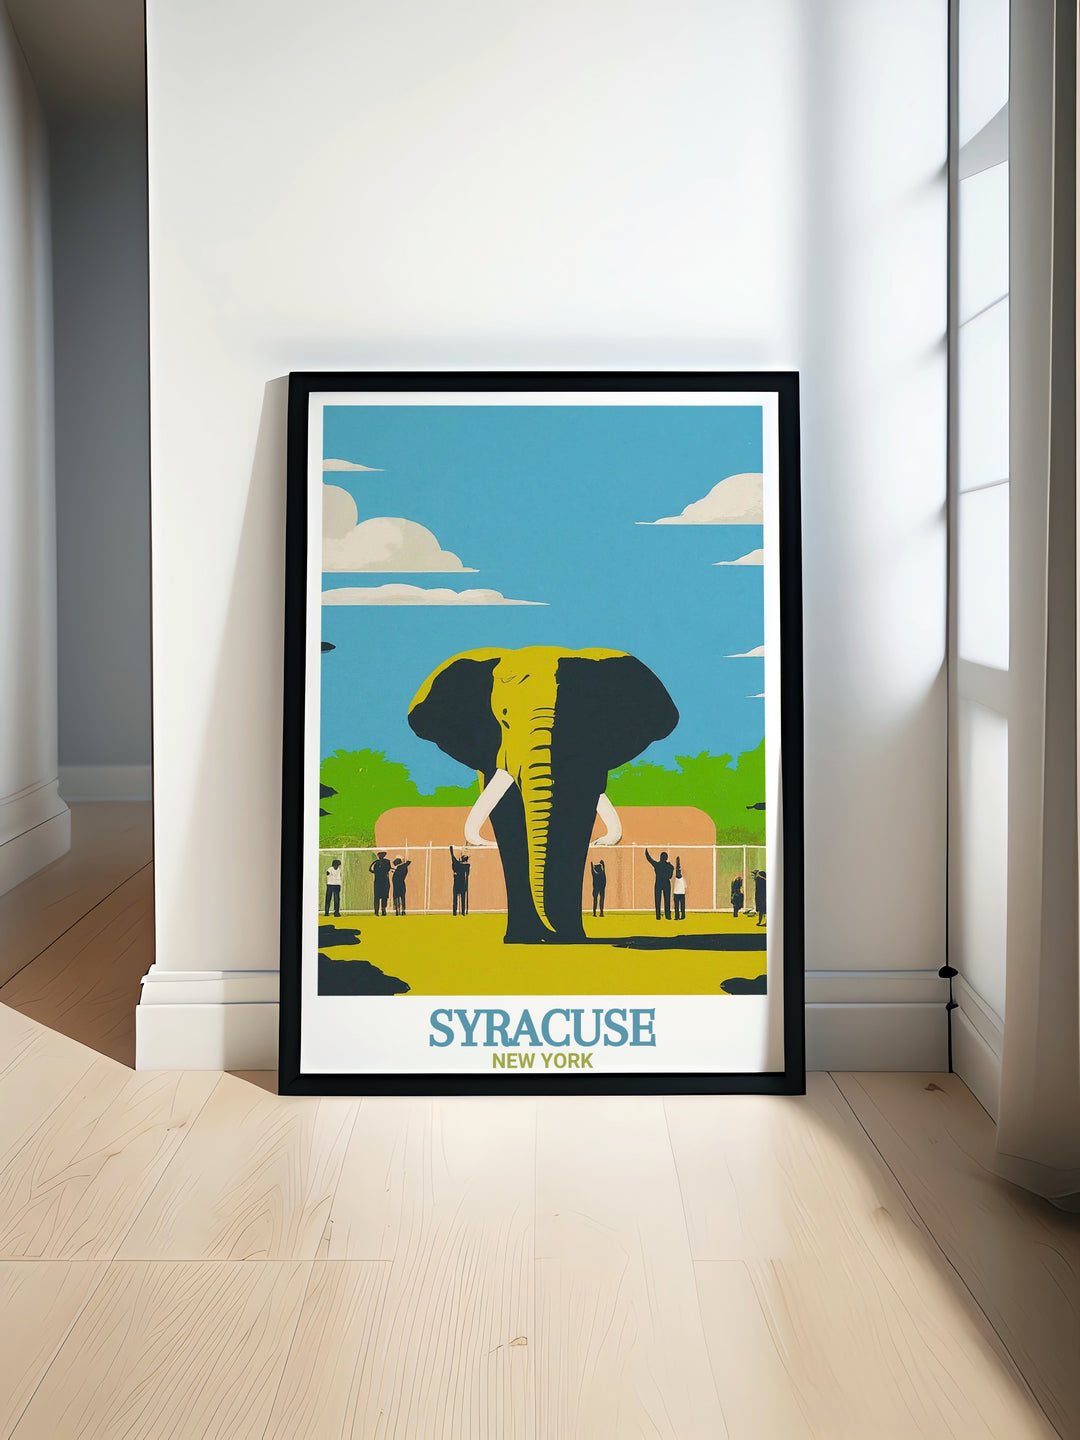 Rosamond Gifford Zoo modern print showcasing the vibrant wildlife and lush greenery of Syracuse perfect for home decor or as a thoughtful gift capturing the natural beauty of this iconic zoo ideal for any living room or office space enhancing your interior with elegance